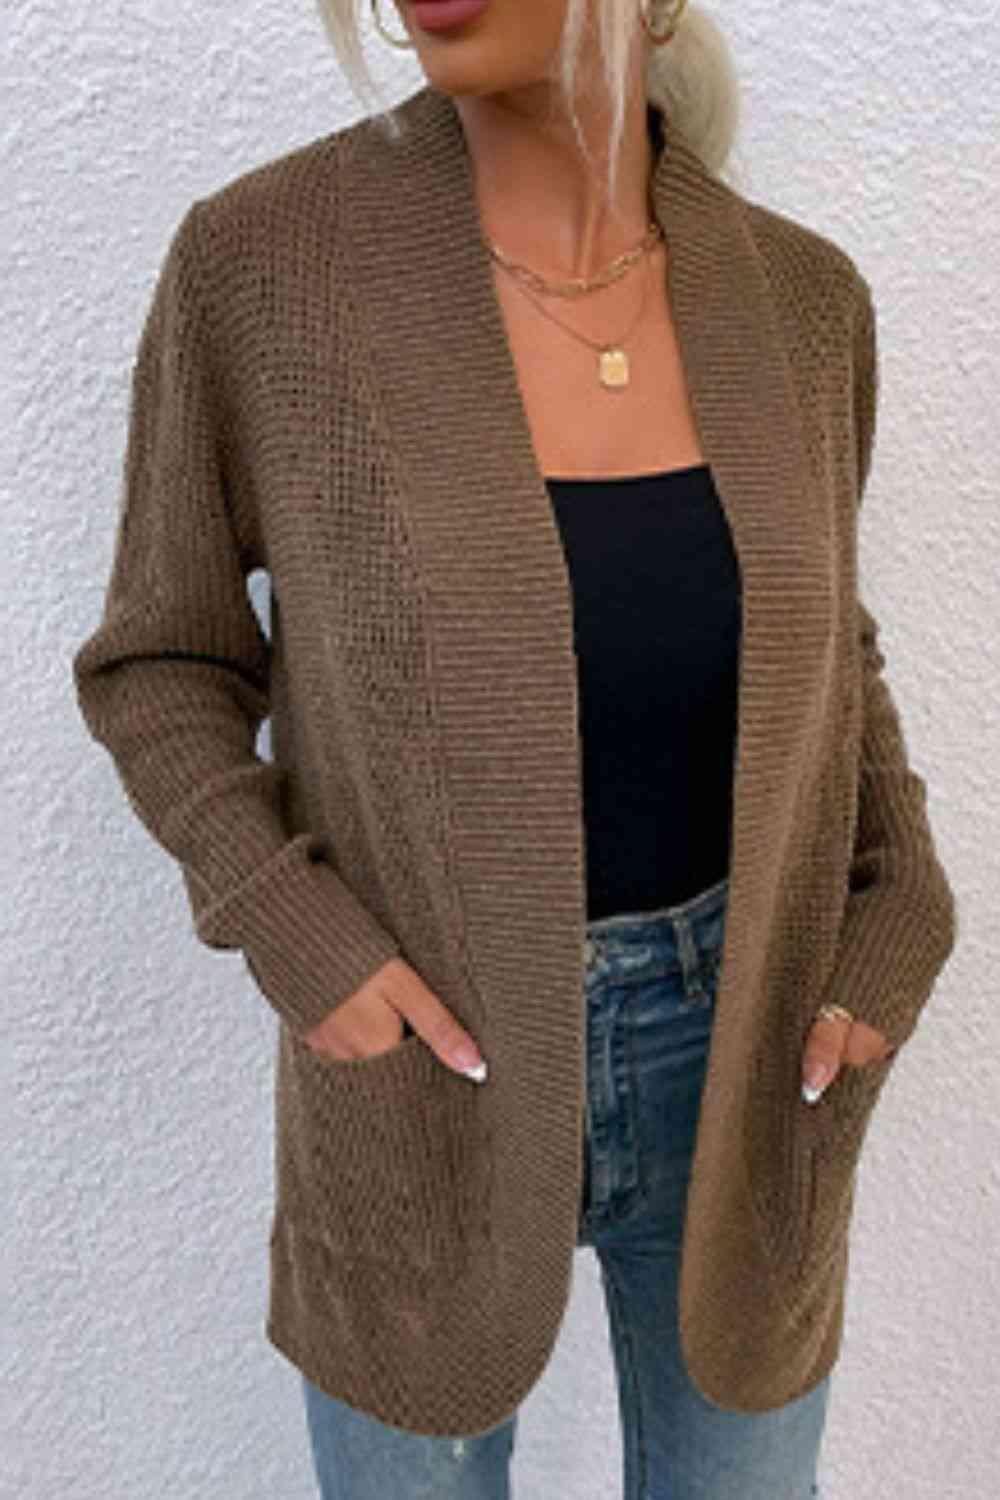 a woman wearing a brown cardigan sweater and jeans